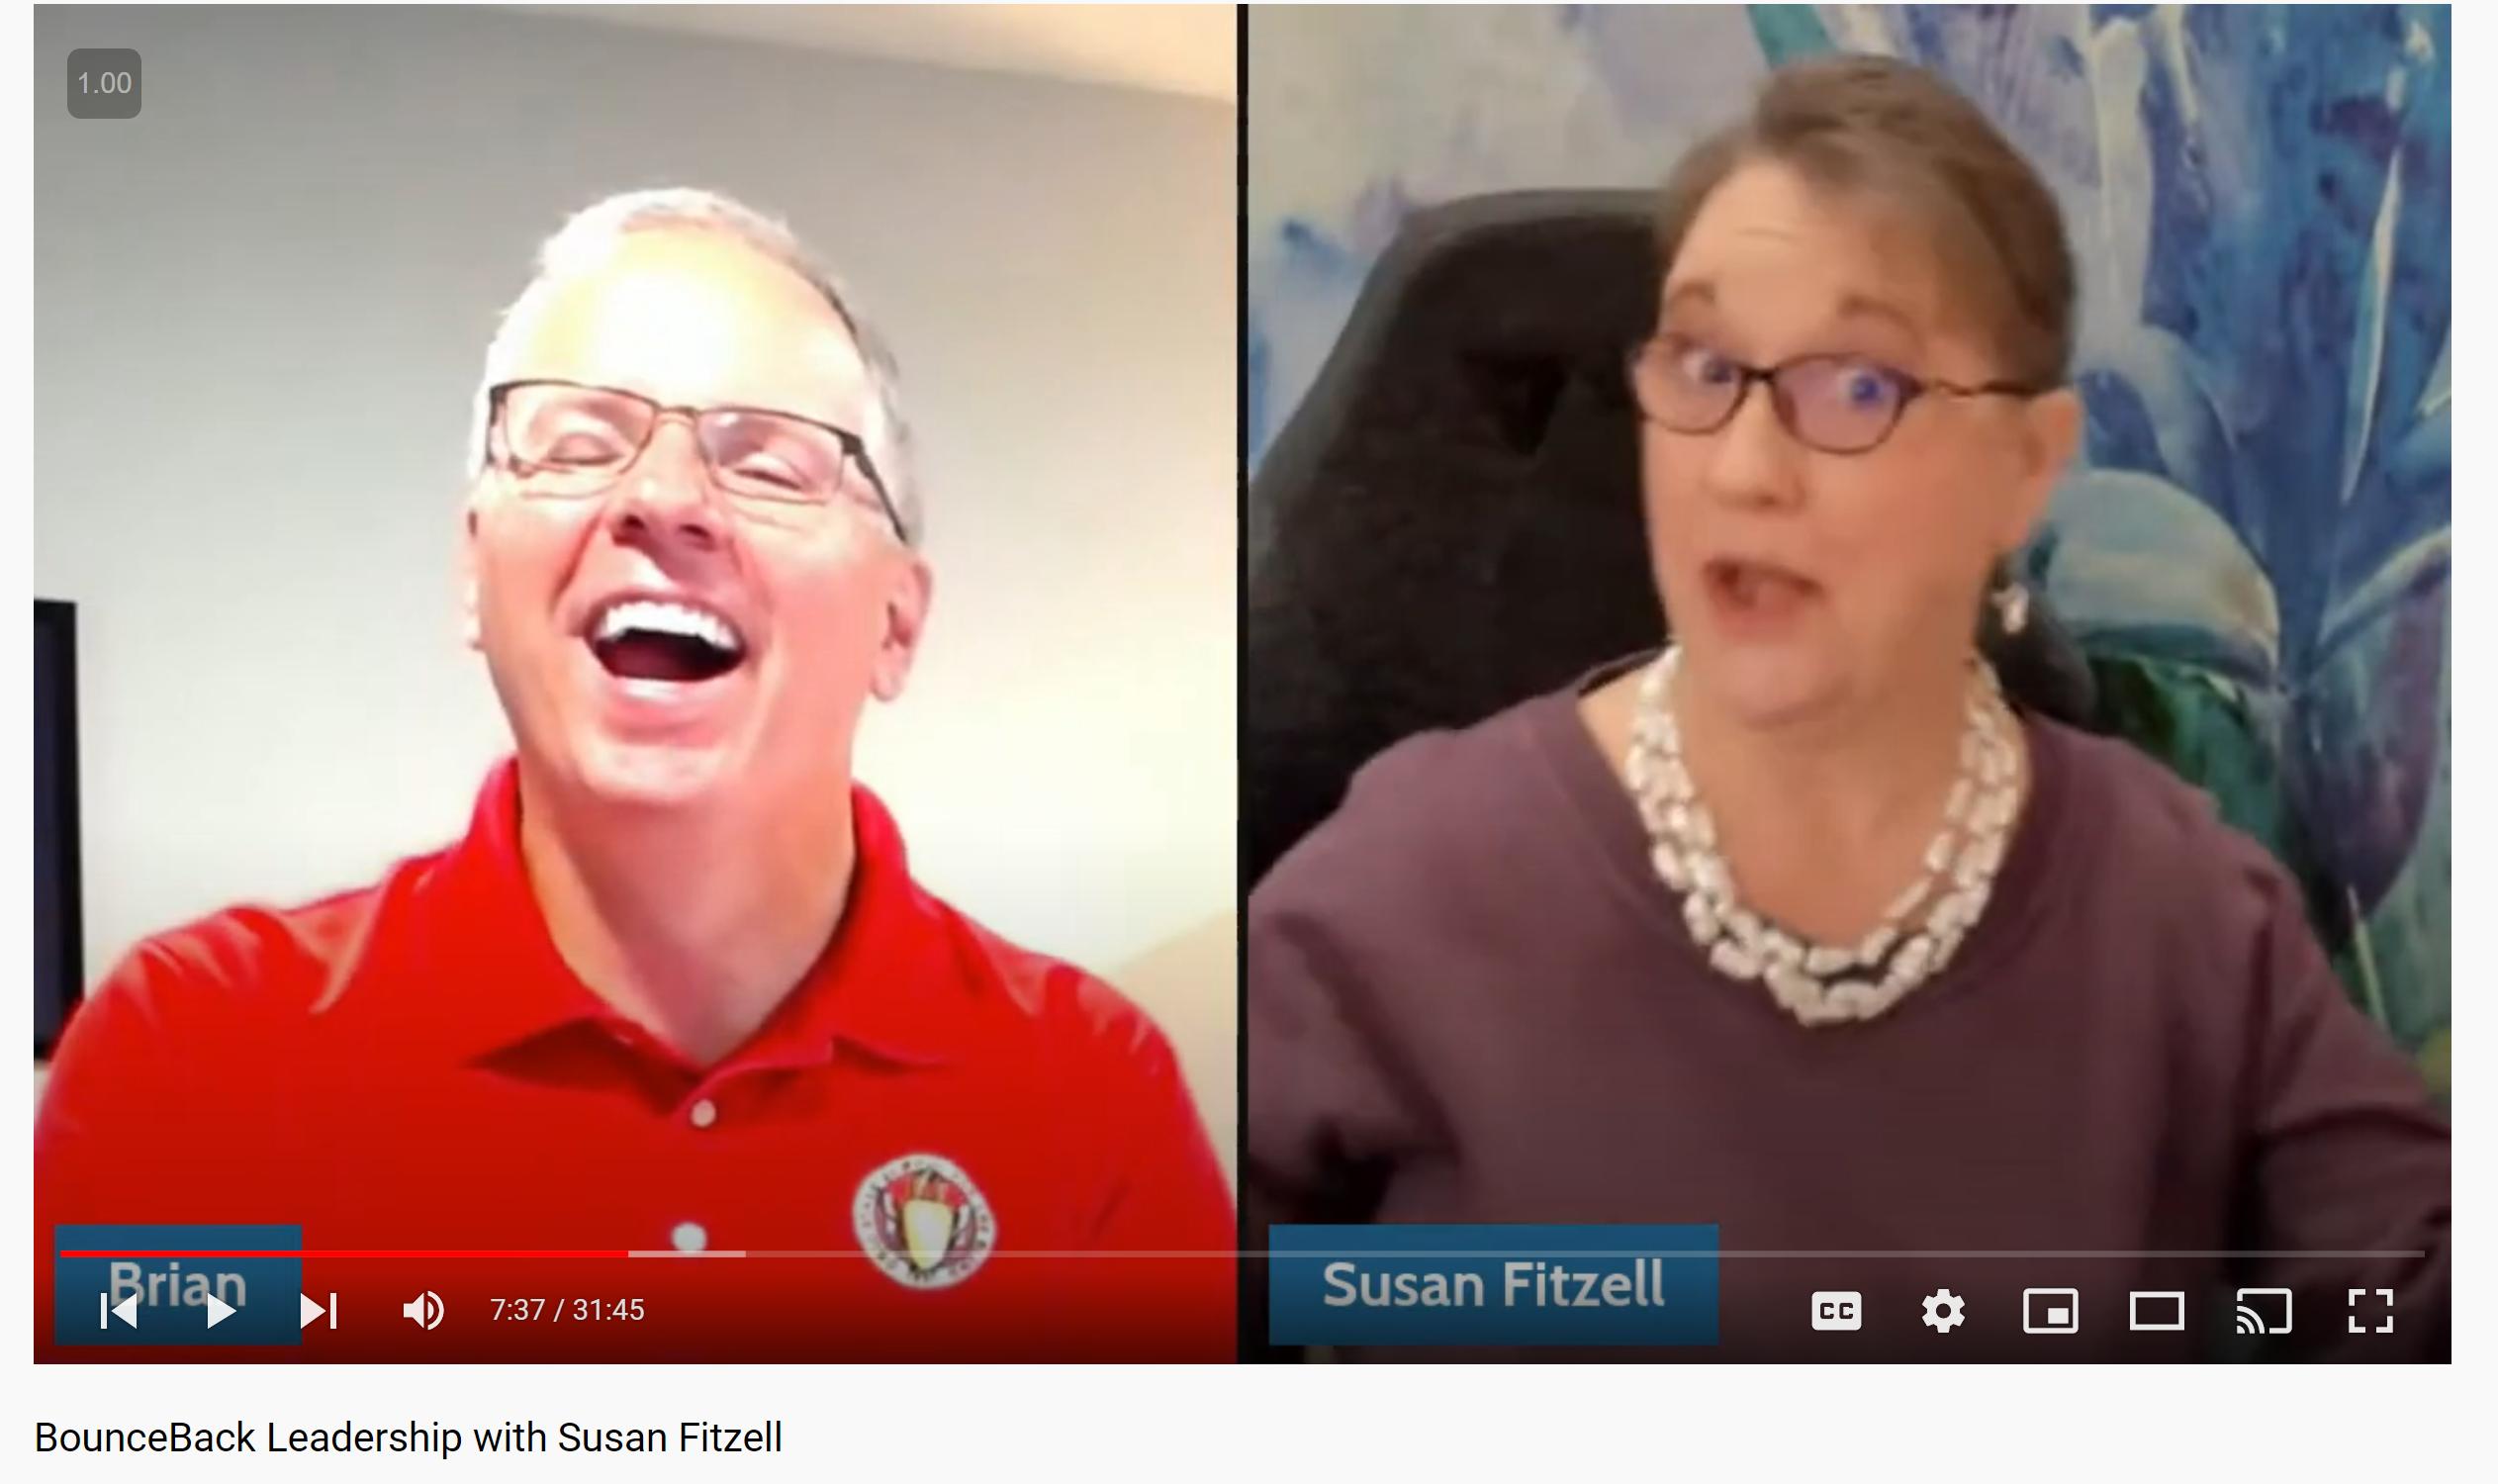 Screenshot from the Bounce Back Leadership Show, It's a photo of Brian Wagner, Host and Susan Fitzell, Guest, side by side on Zoom.